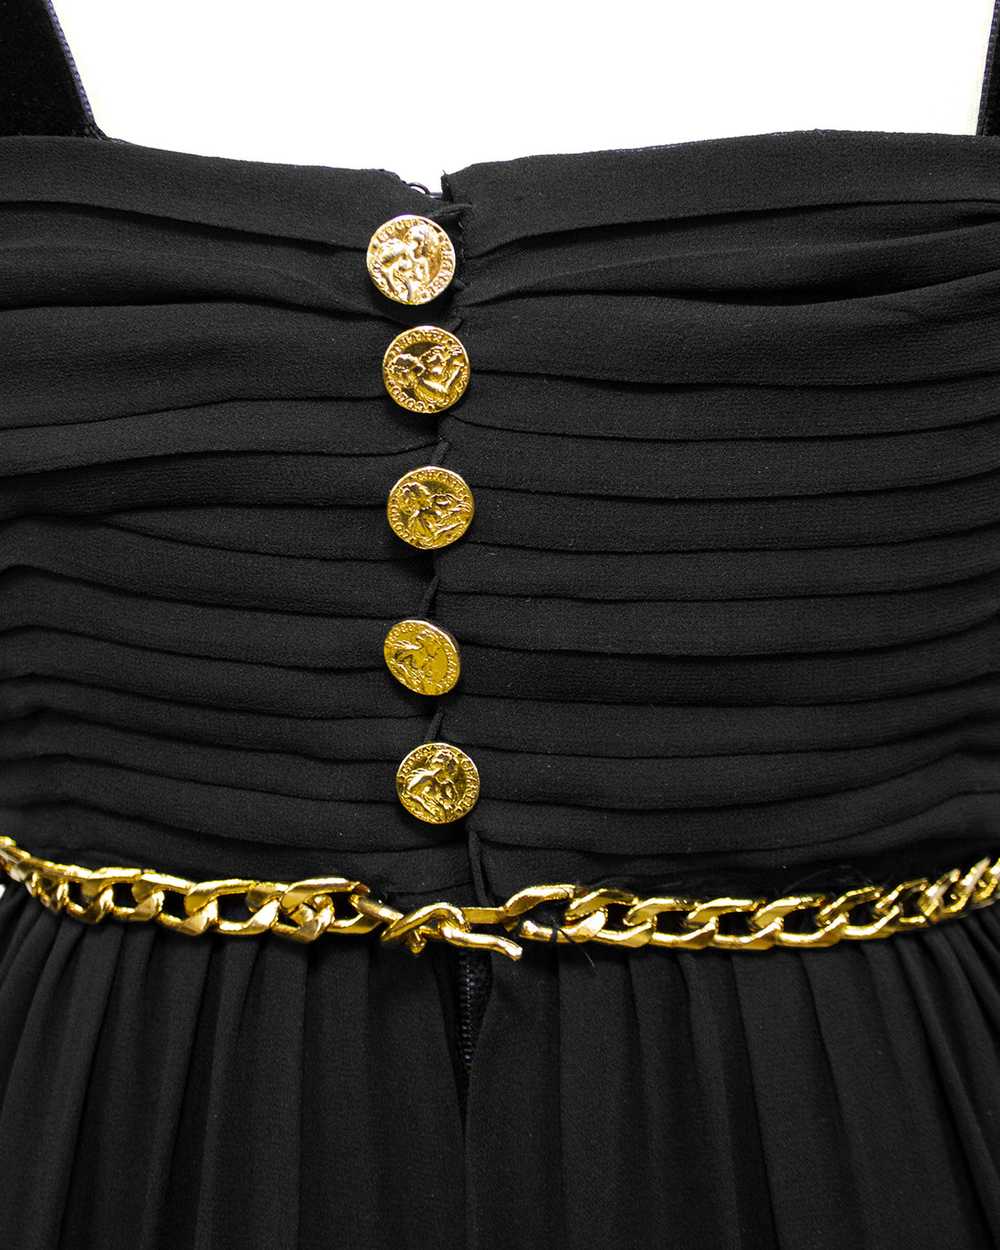 Chanel Black Chiffon Gown with Gold Chain Belt - image 8